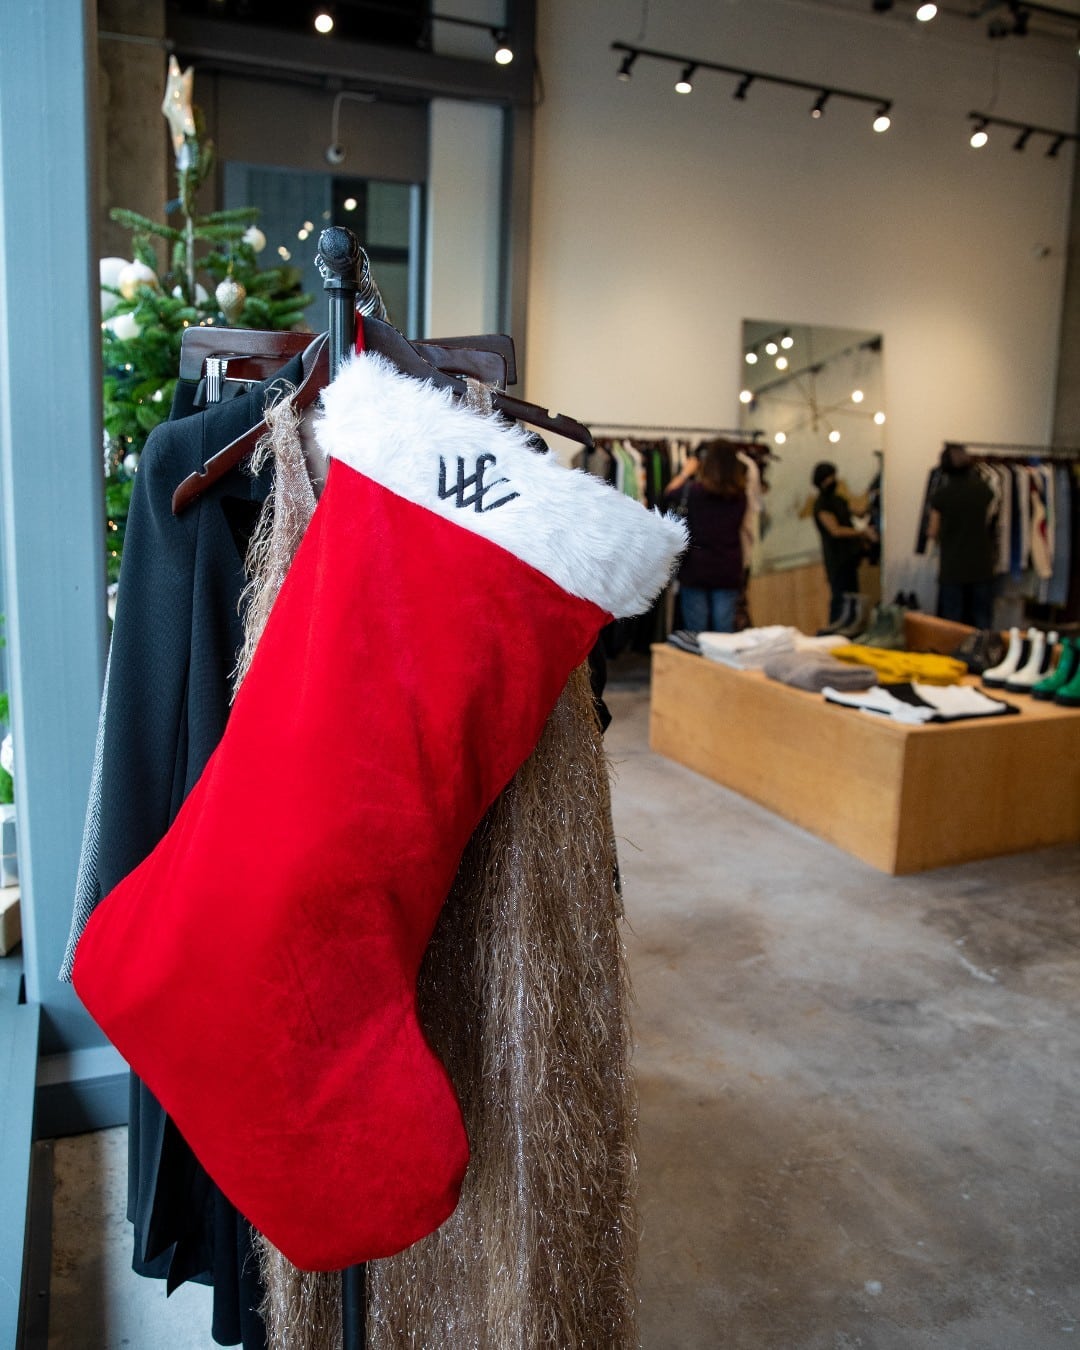 Stocking Stuffer Saturday & Sundays are back at Ward Village! Look for the larger-than-life stockings hanging in the windows at participating retailers to guide you to the perfect petite presents. Click the link in our bio for a list of locations.